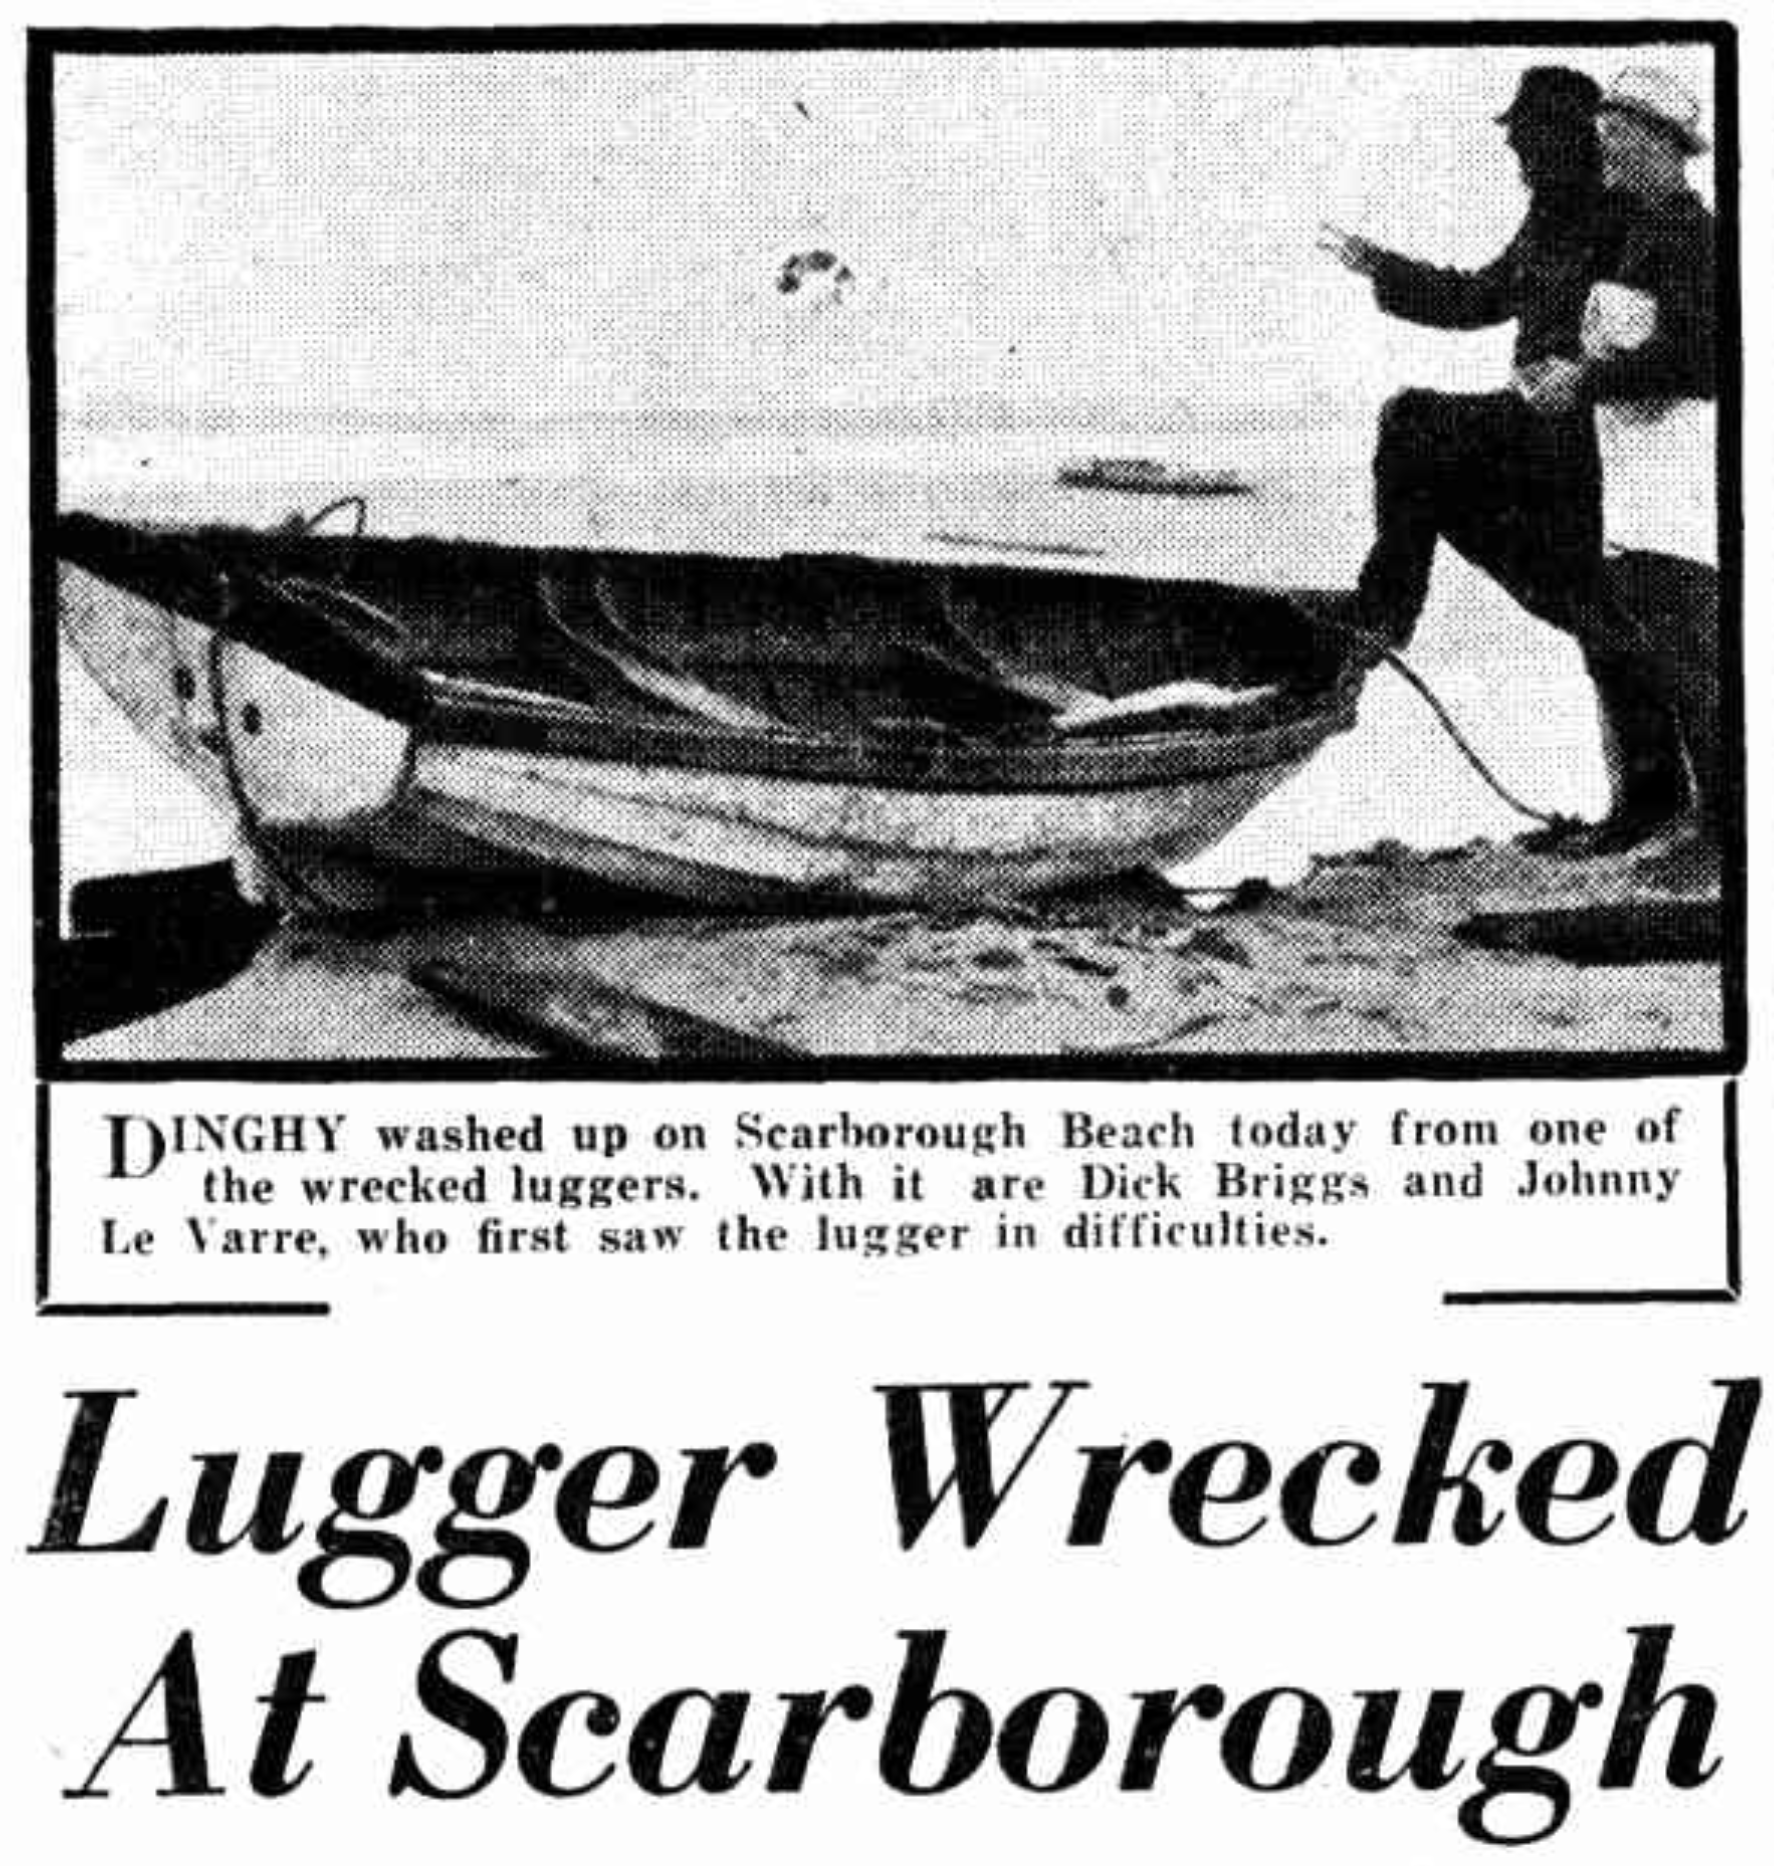 Newspaper Article captures the dinghy washed up on shore